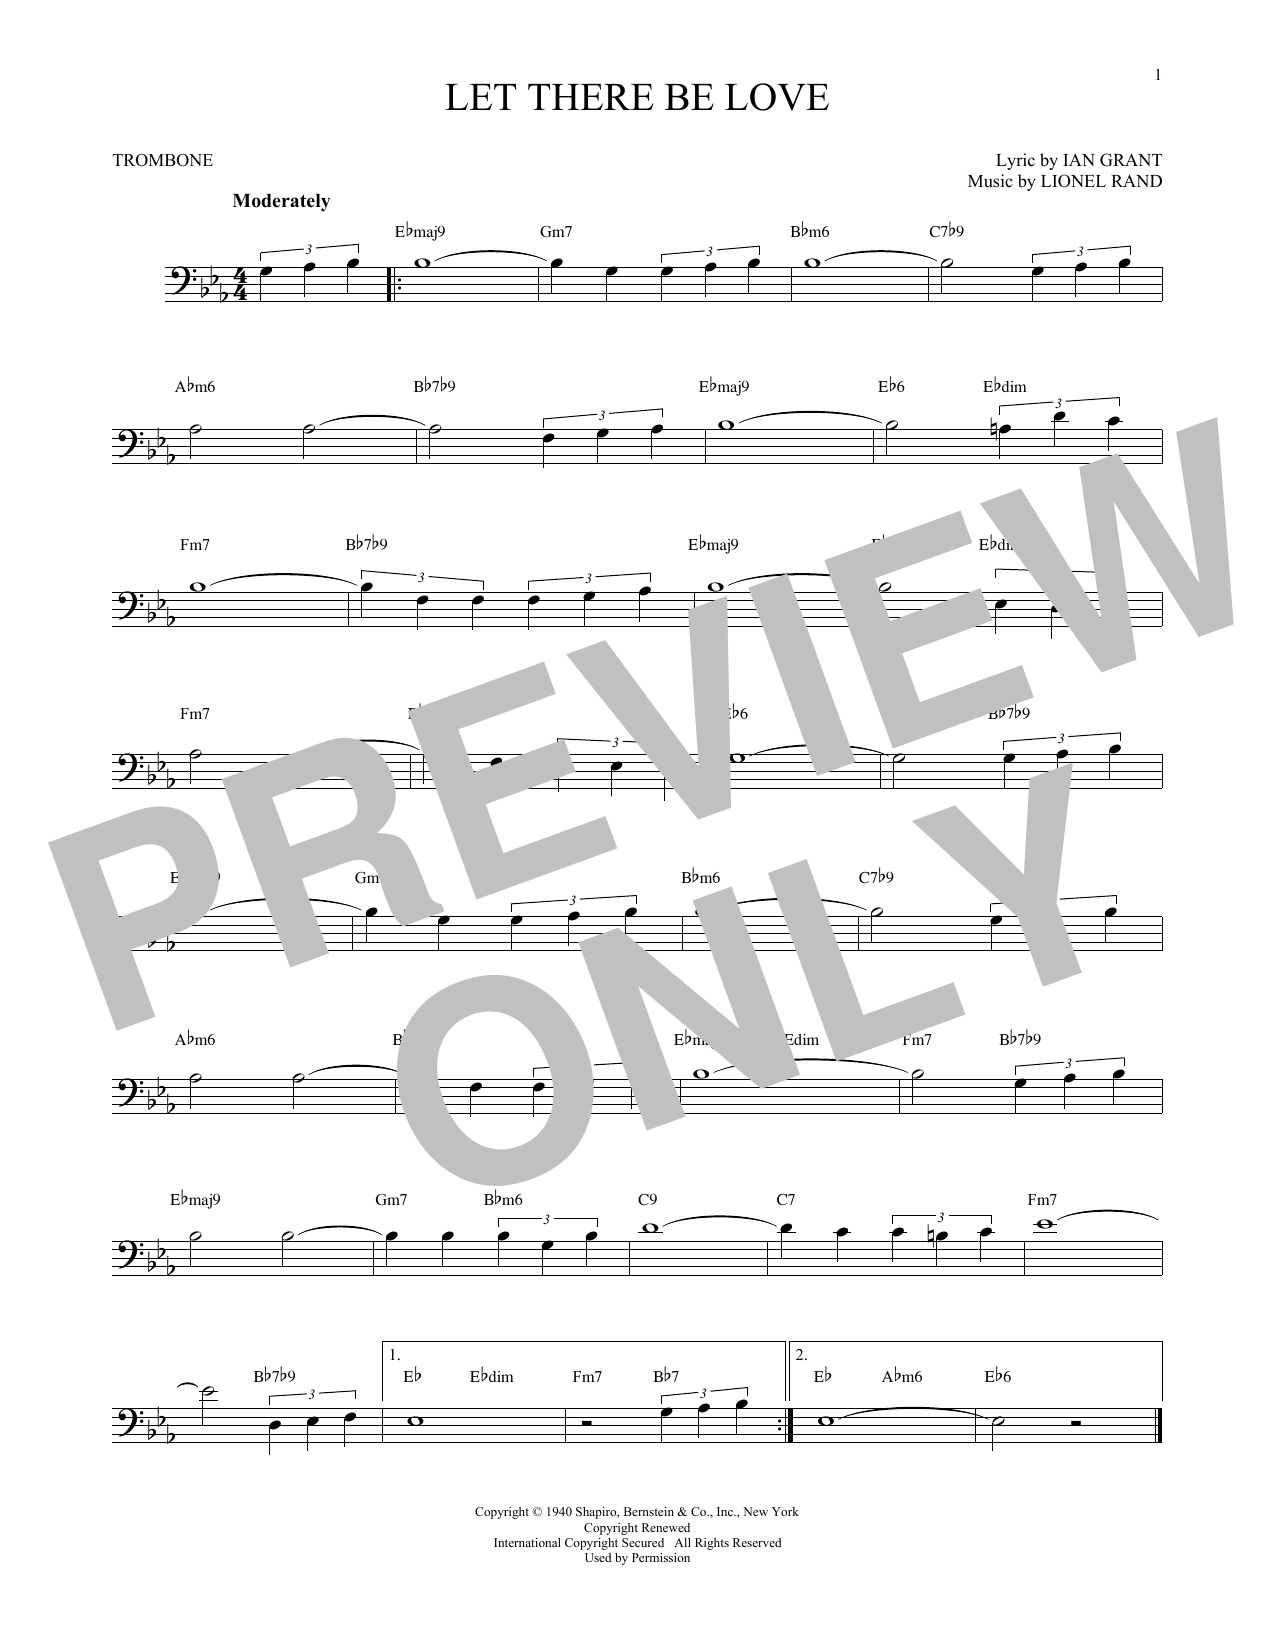 Download Lionel Rand Let There Be Love Sheet Music